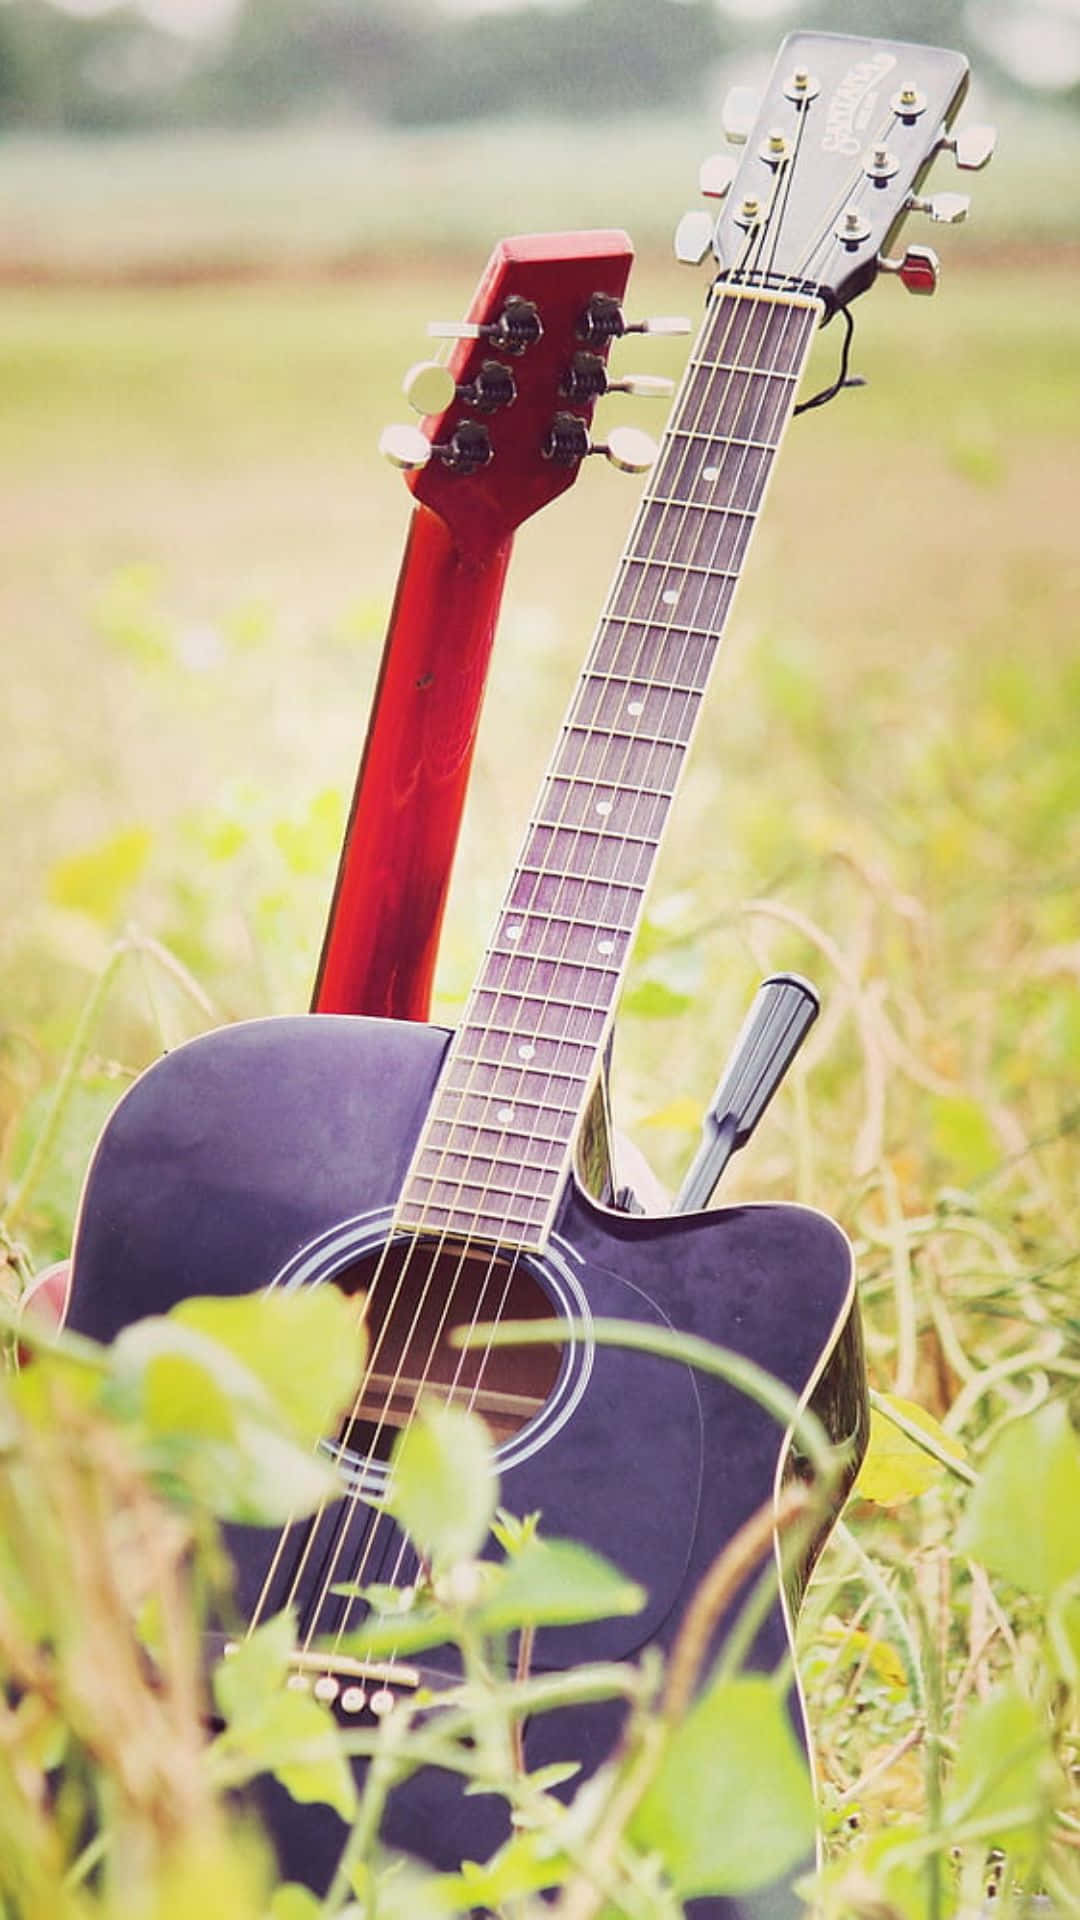 Melody in Nature: An Acoustic Guitar in an Emerald Field Wallpaper